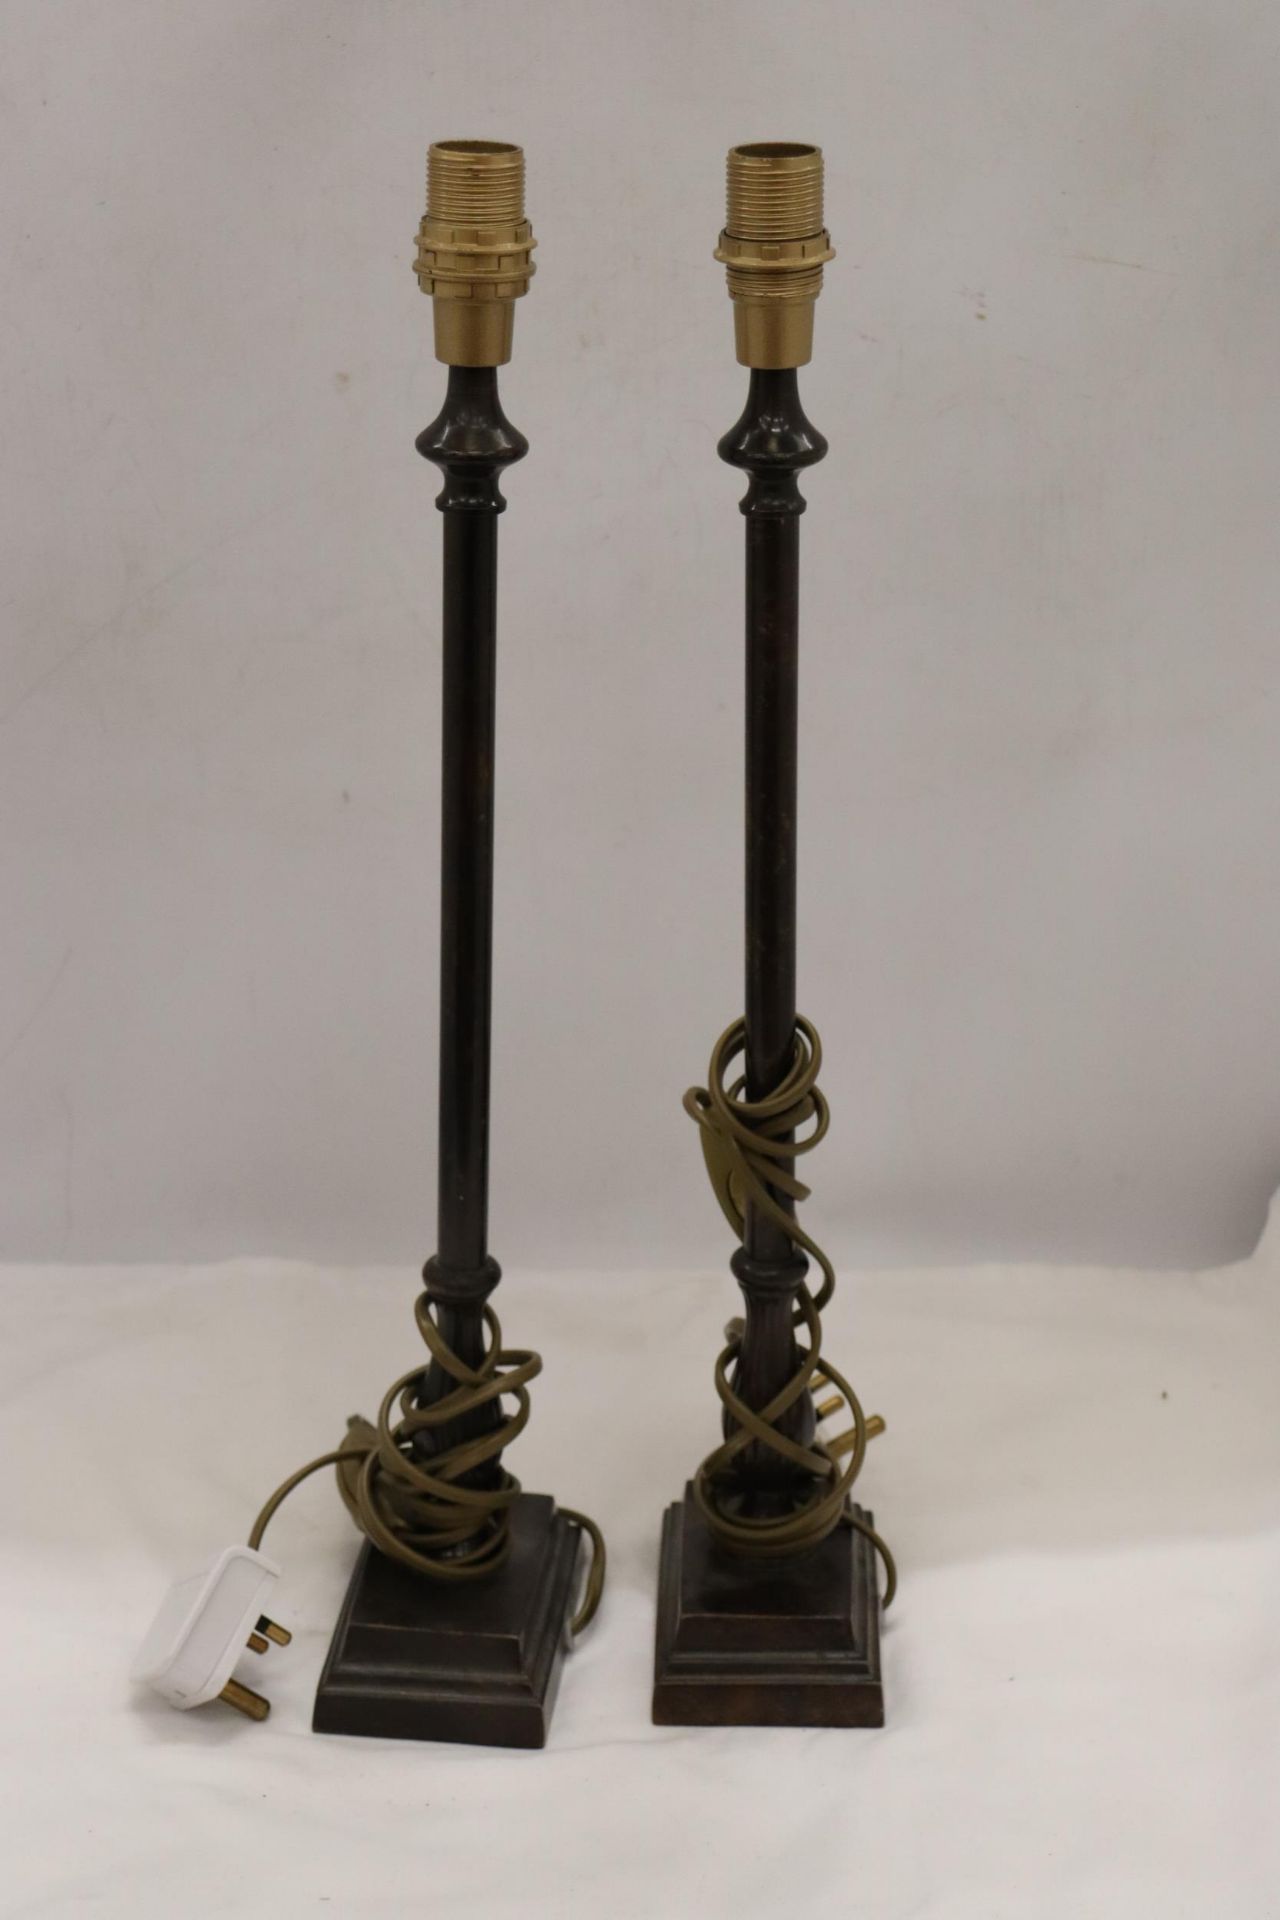 TWO BRONZE EFFECT LAMP BASES - Image 5 of 5